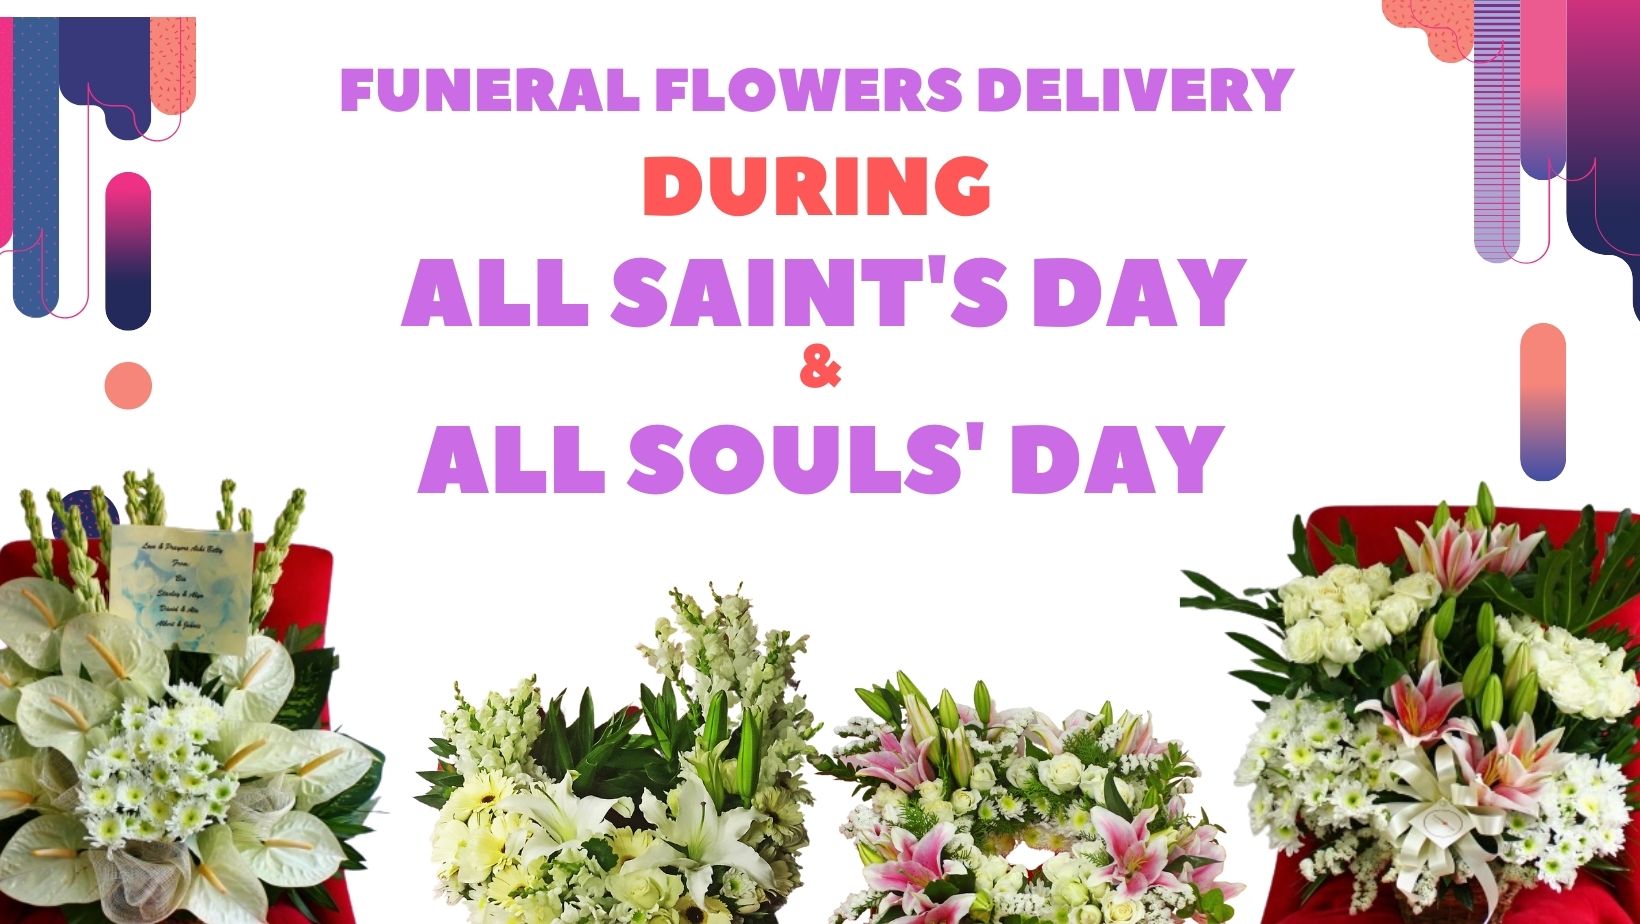 funeral flower delivery article october 28 2021 posit